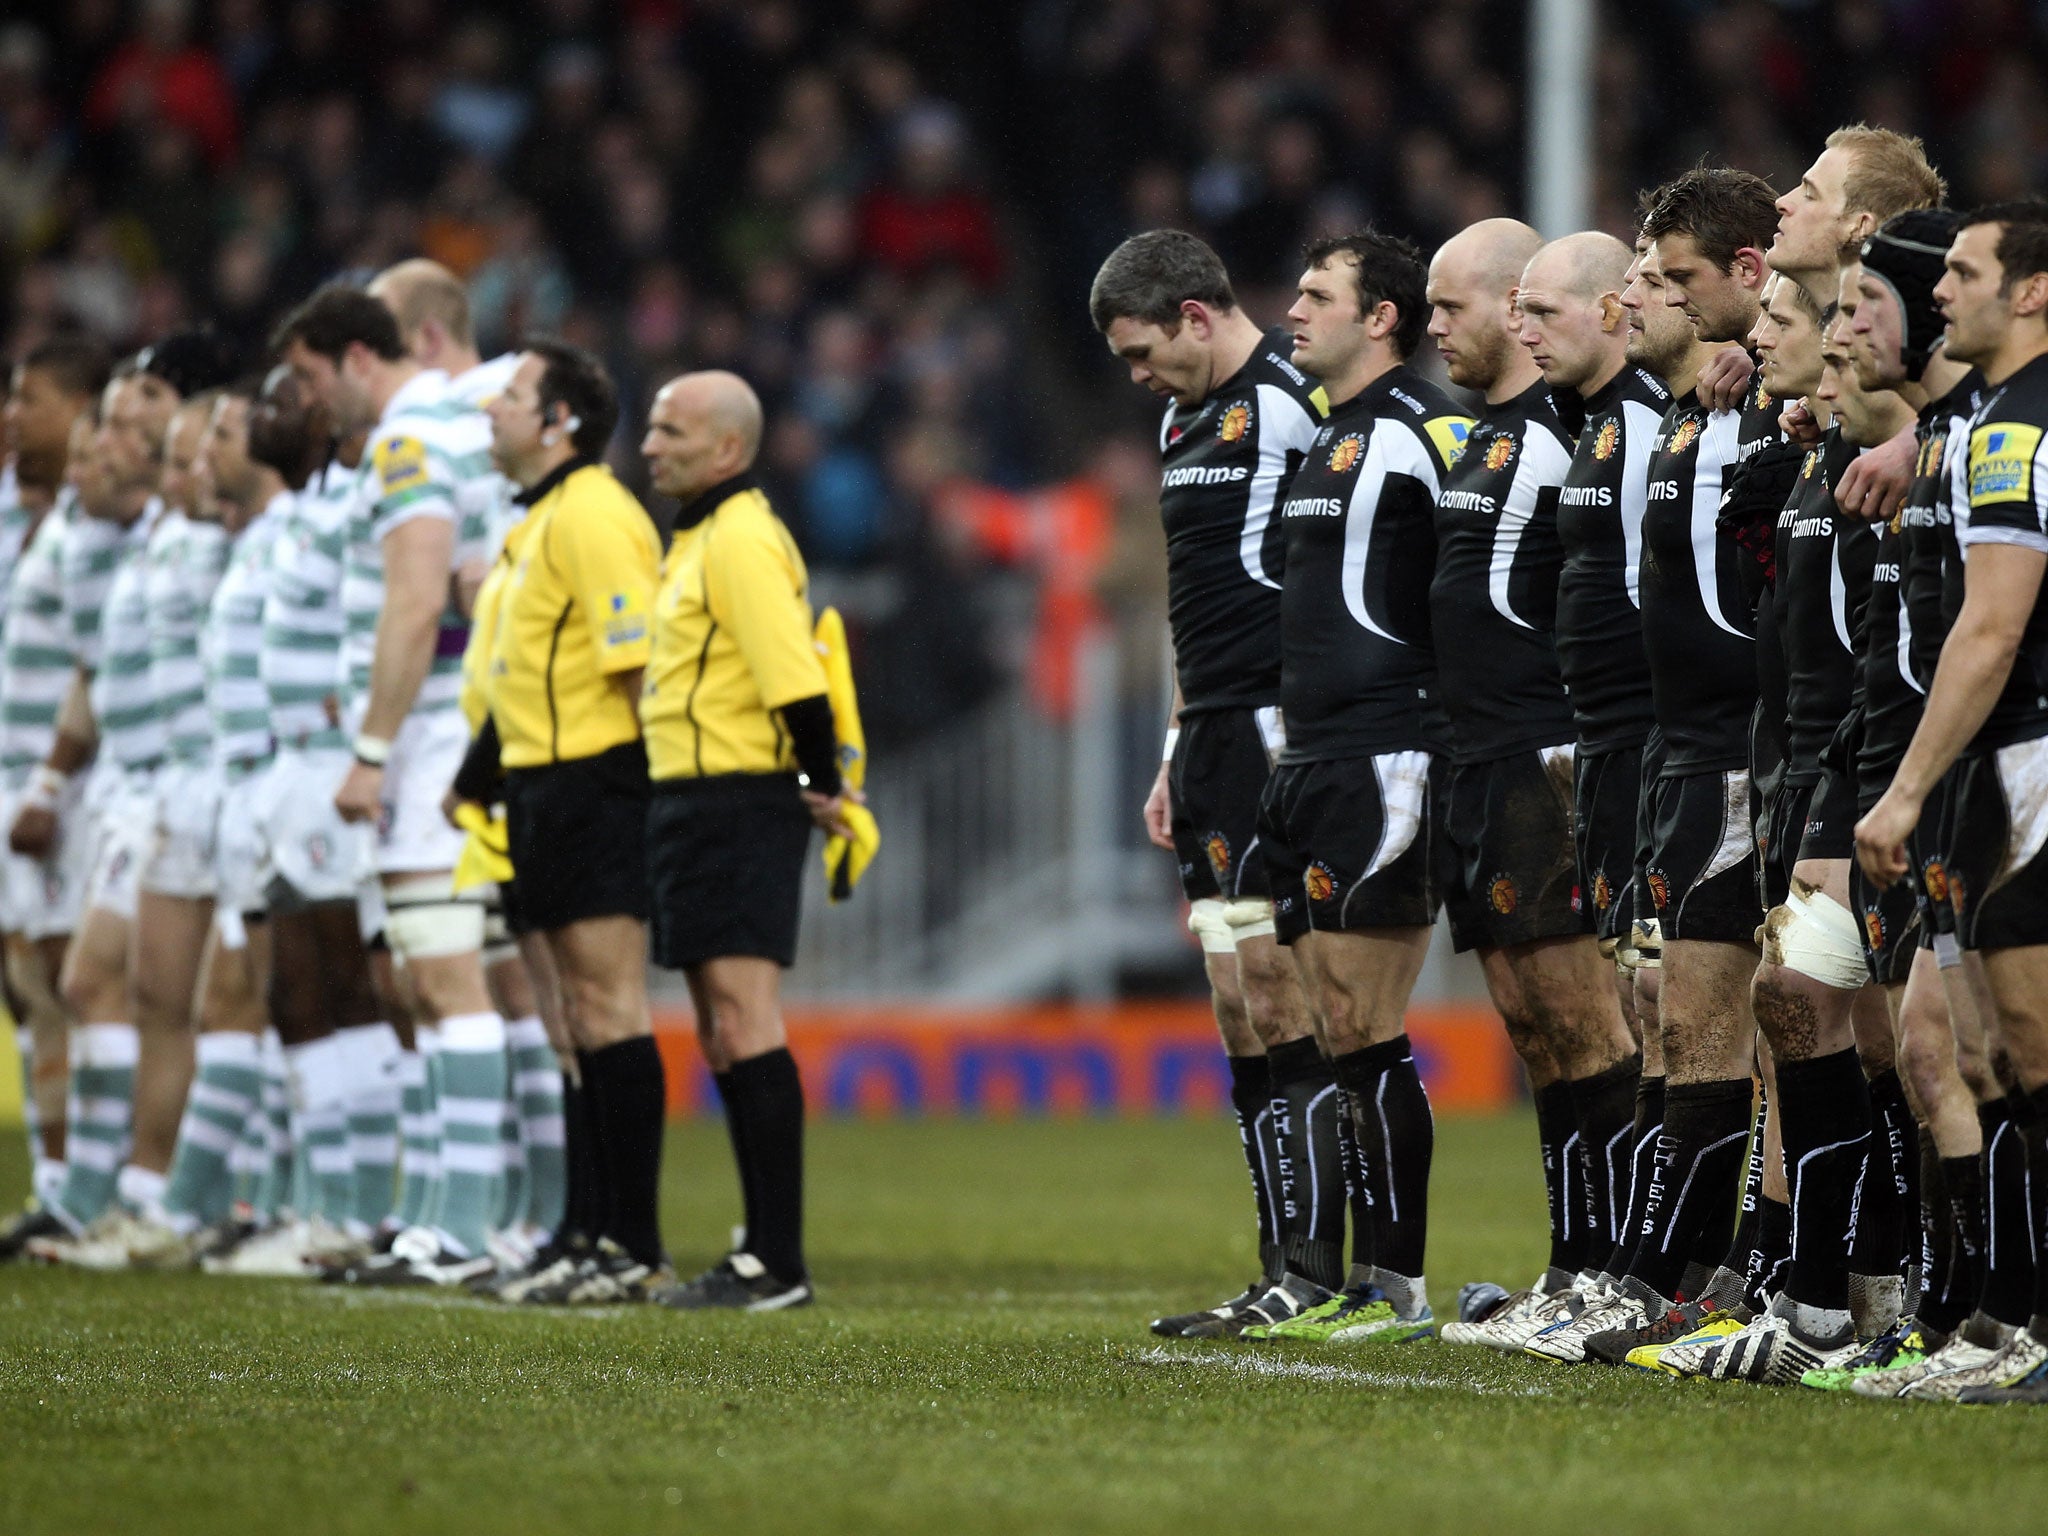 In honour: A minute’s silence was held for Baroness Thatcher before the game